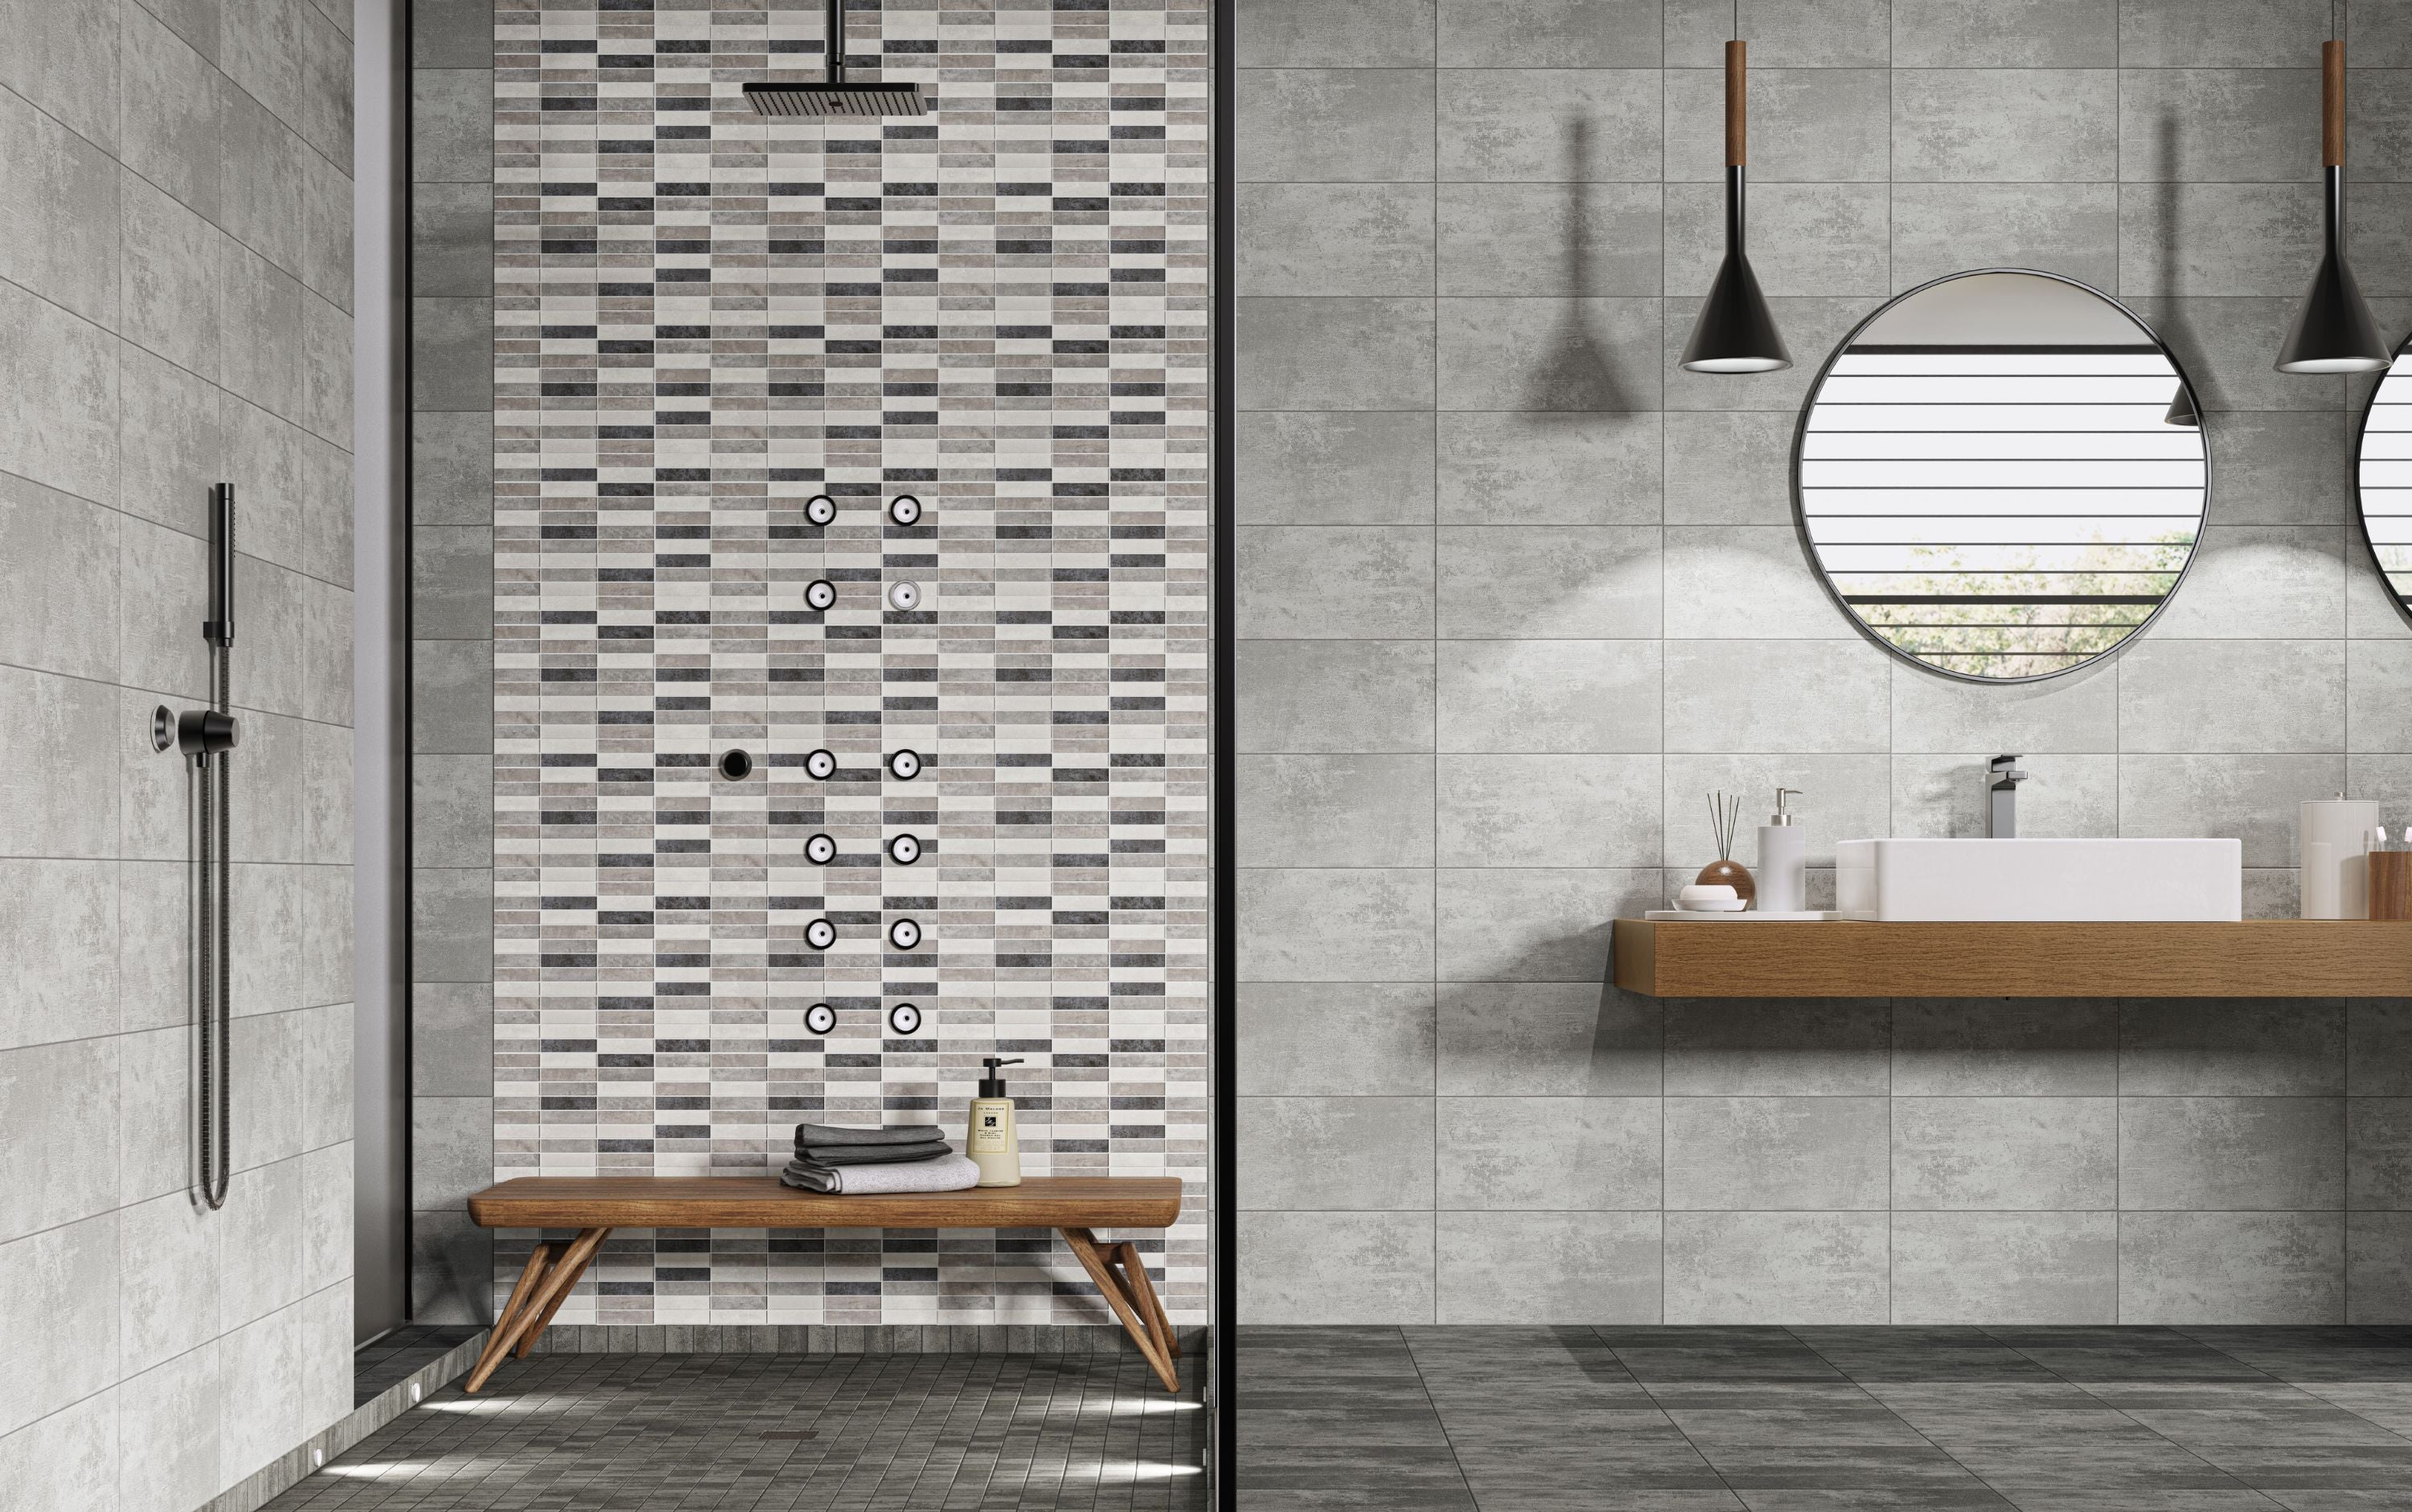 Easy Wall Tile 25x40 | Decor 02 MIX Glossy